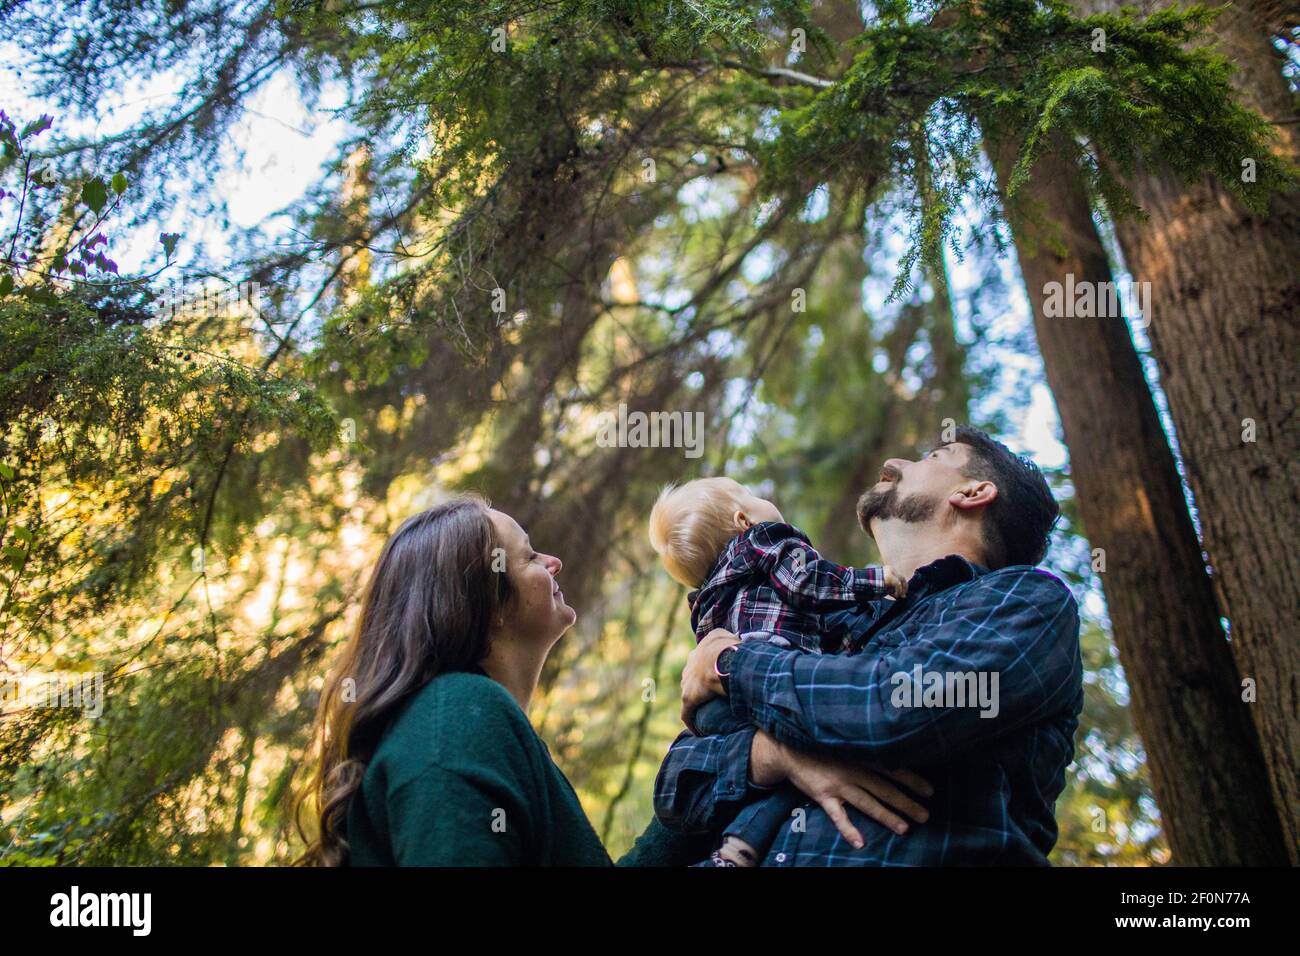 Mother, father, son enjoying nature, looking up into forest canopy. Stock Photo